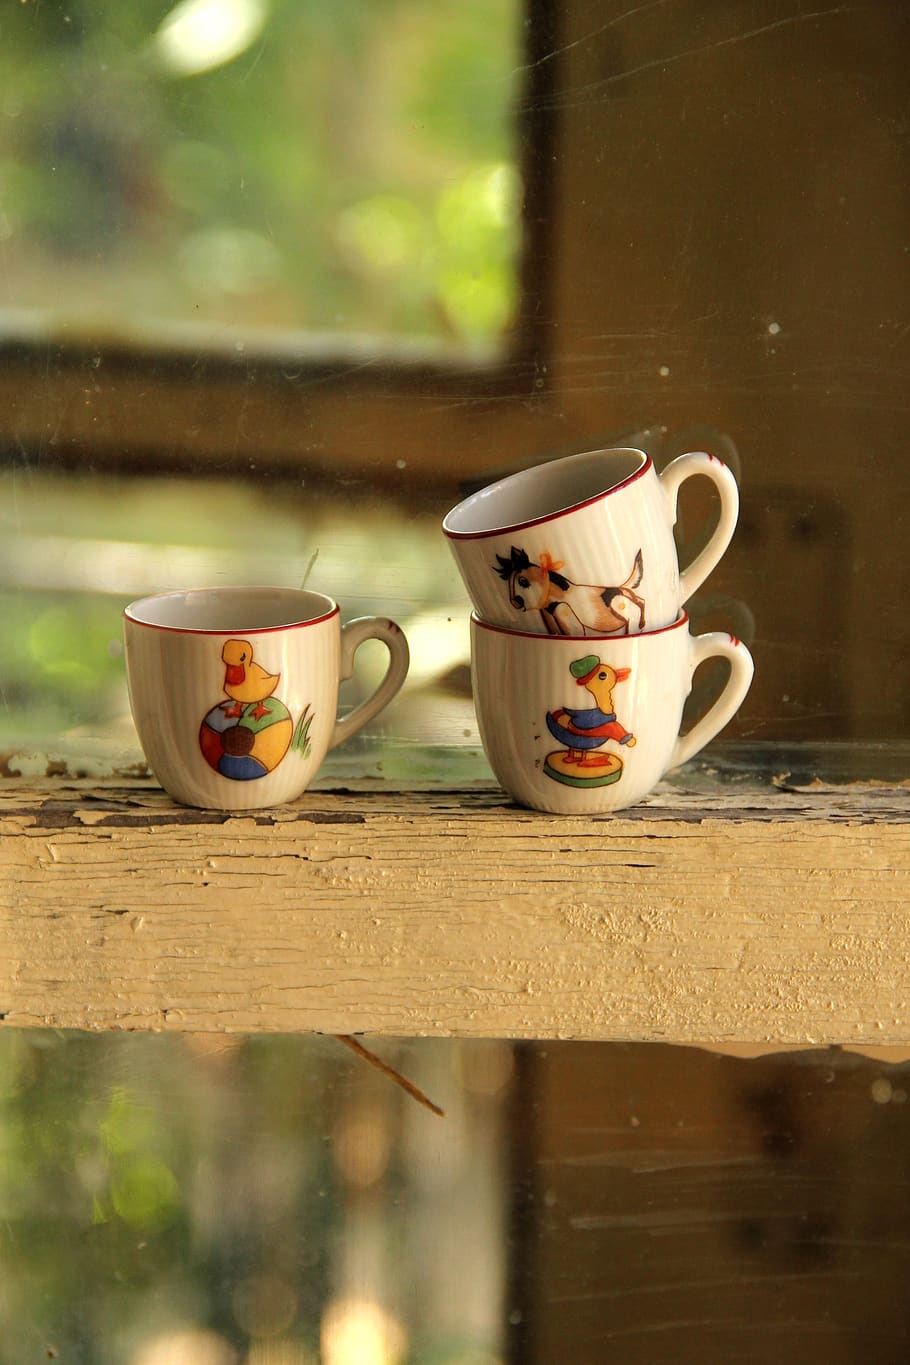 cup, child, duck, sweet, still life, old, retro, small, a little, childhood